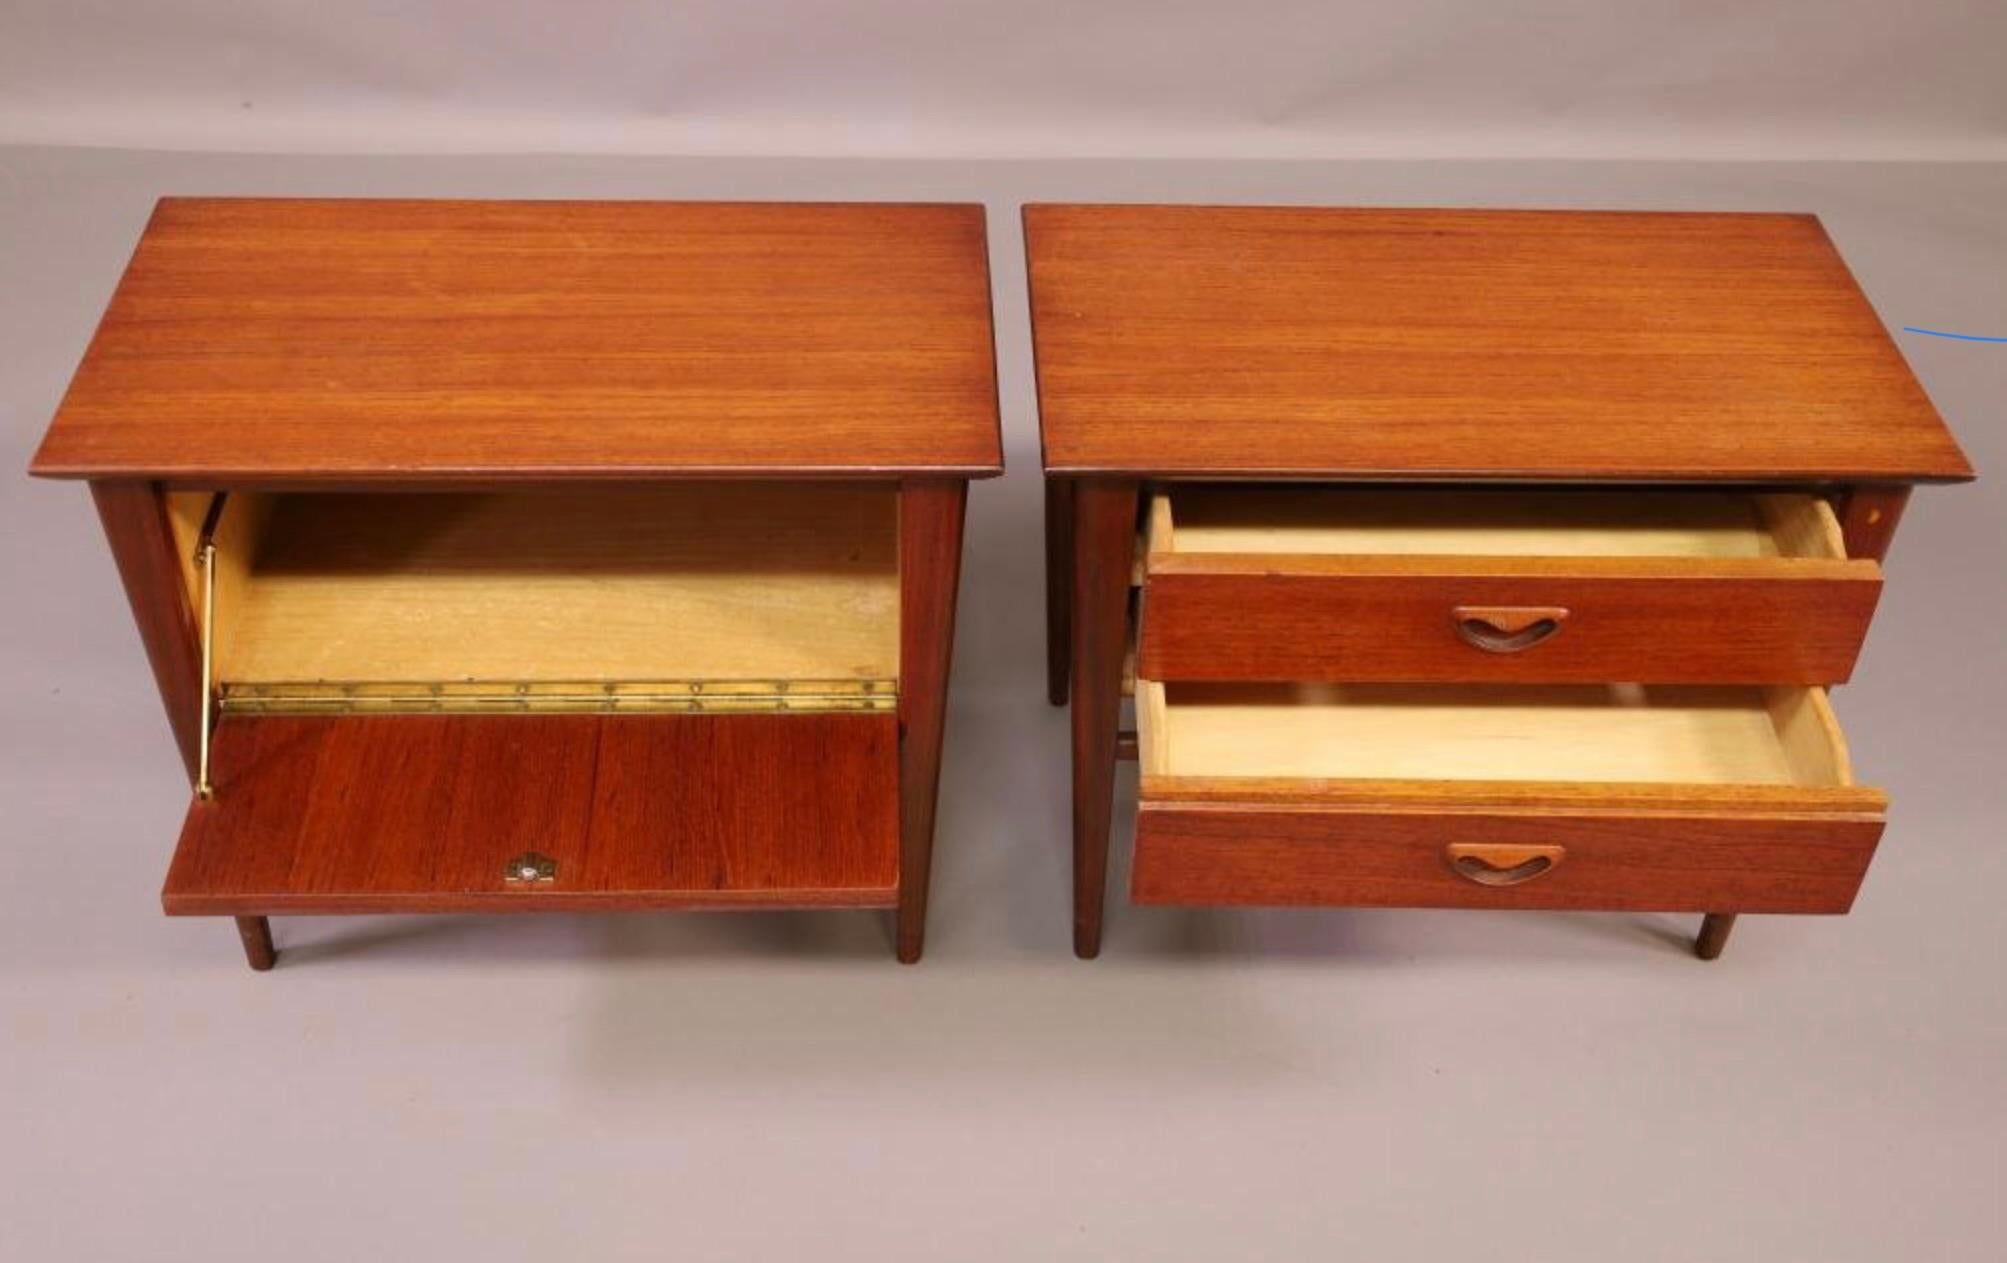 Lovely dimunitive pair of teak nightstands or end tables designed by Louis Van Teeffelen for Webe Meubelen. A matched pair they are different and complimentary. One has two drawers, the other has a drop front. They are in good age appropriate